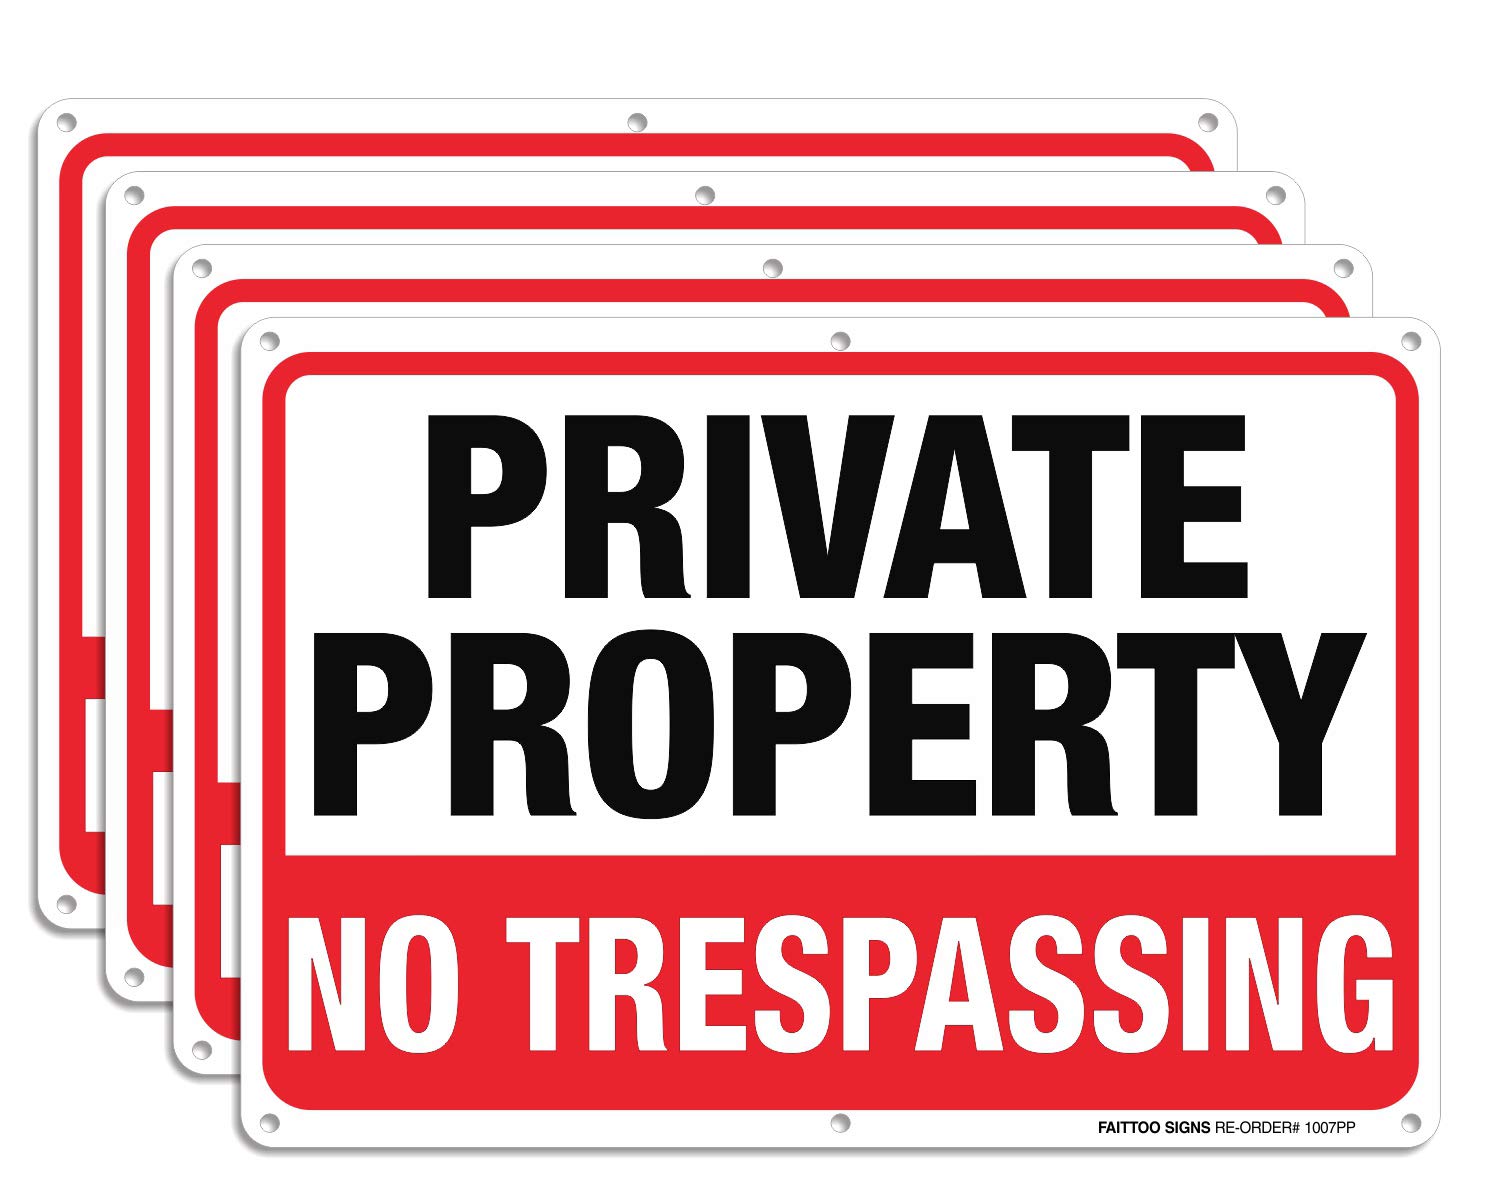 Private Property No Trespassing Metal Sign (4 Pack), 10 x 7 Inches Rust Free .040 Aluminum Sign – Reflective – Weatherproof - Easy to Mount - Indoor / Outdoor Use